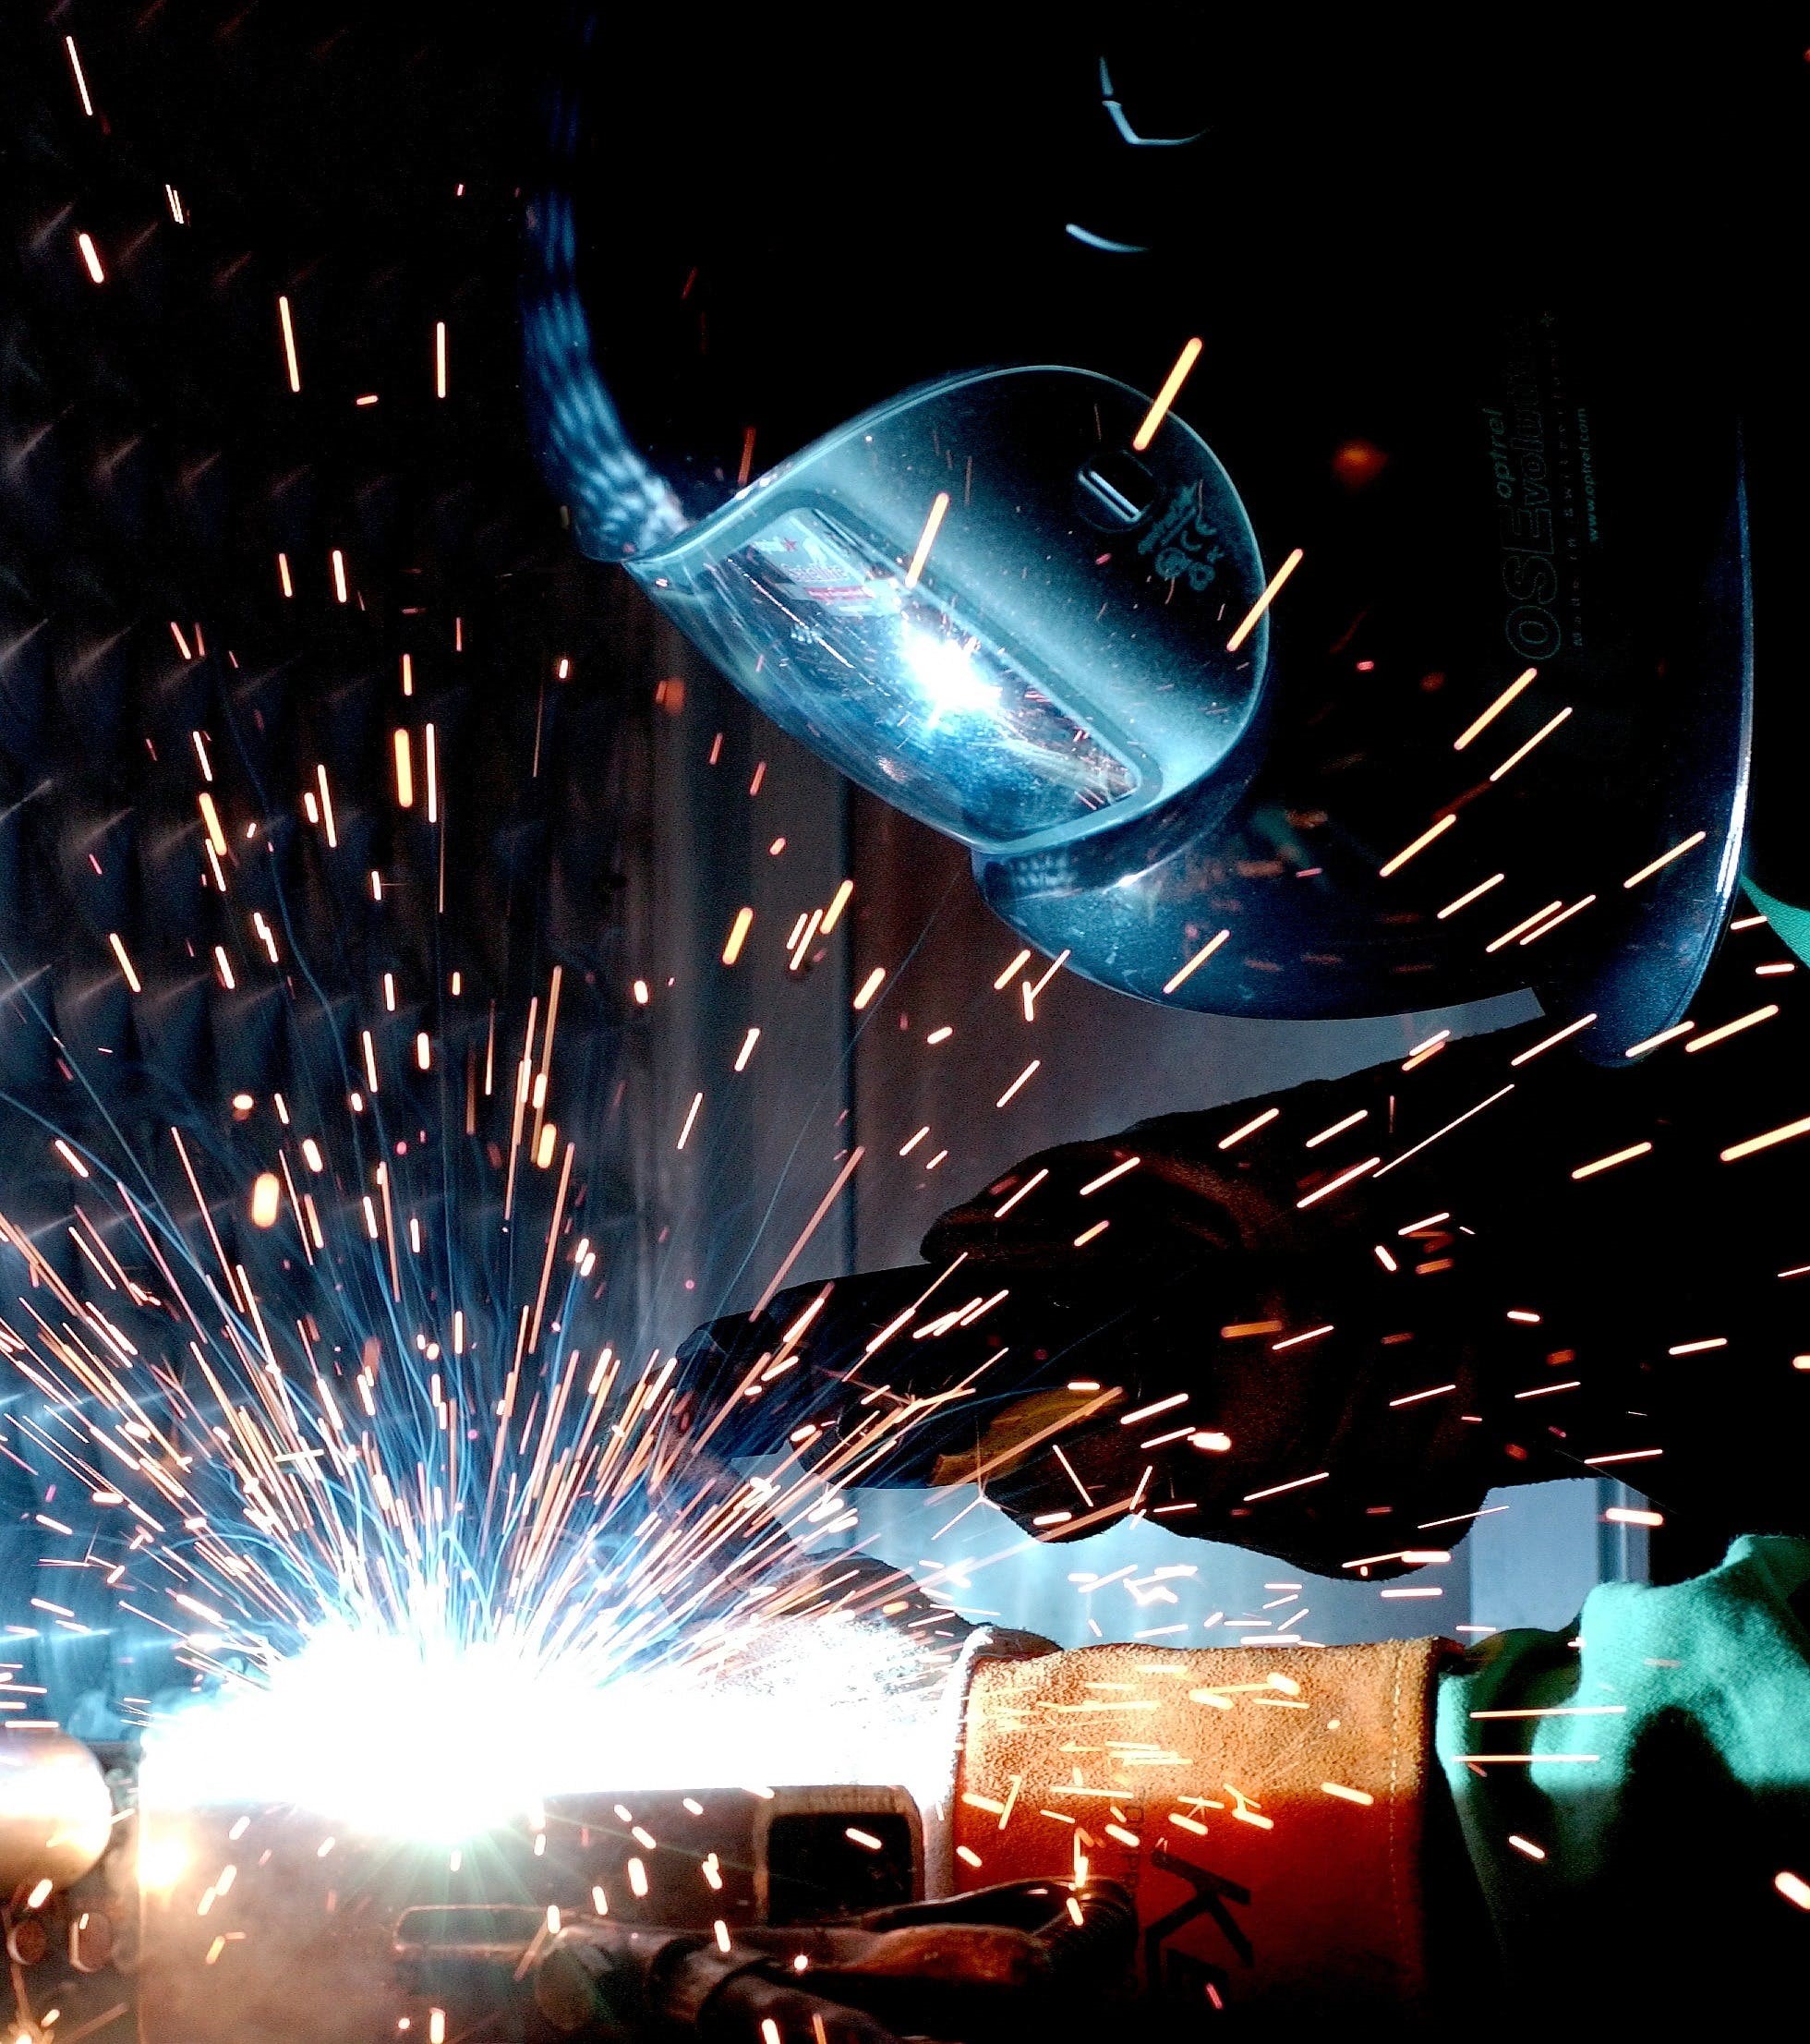 Image of a worker TIG welding a piece of metal.